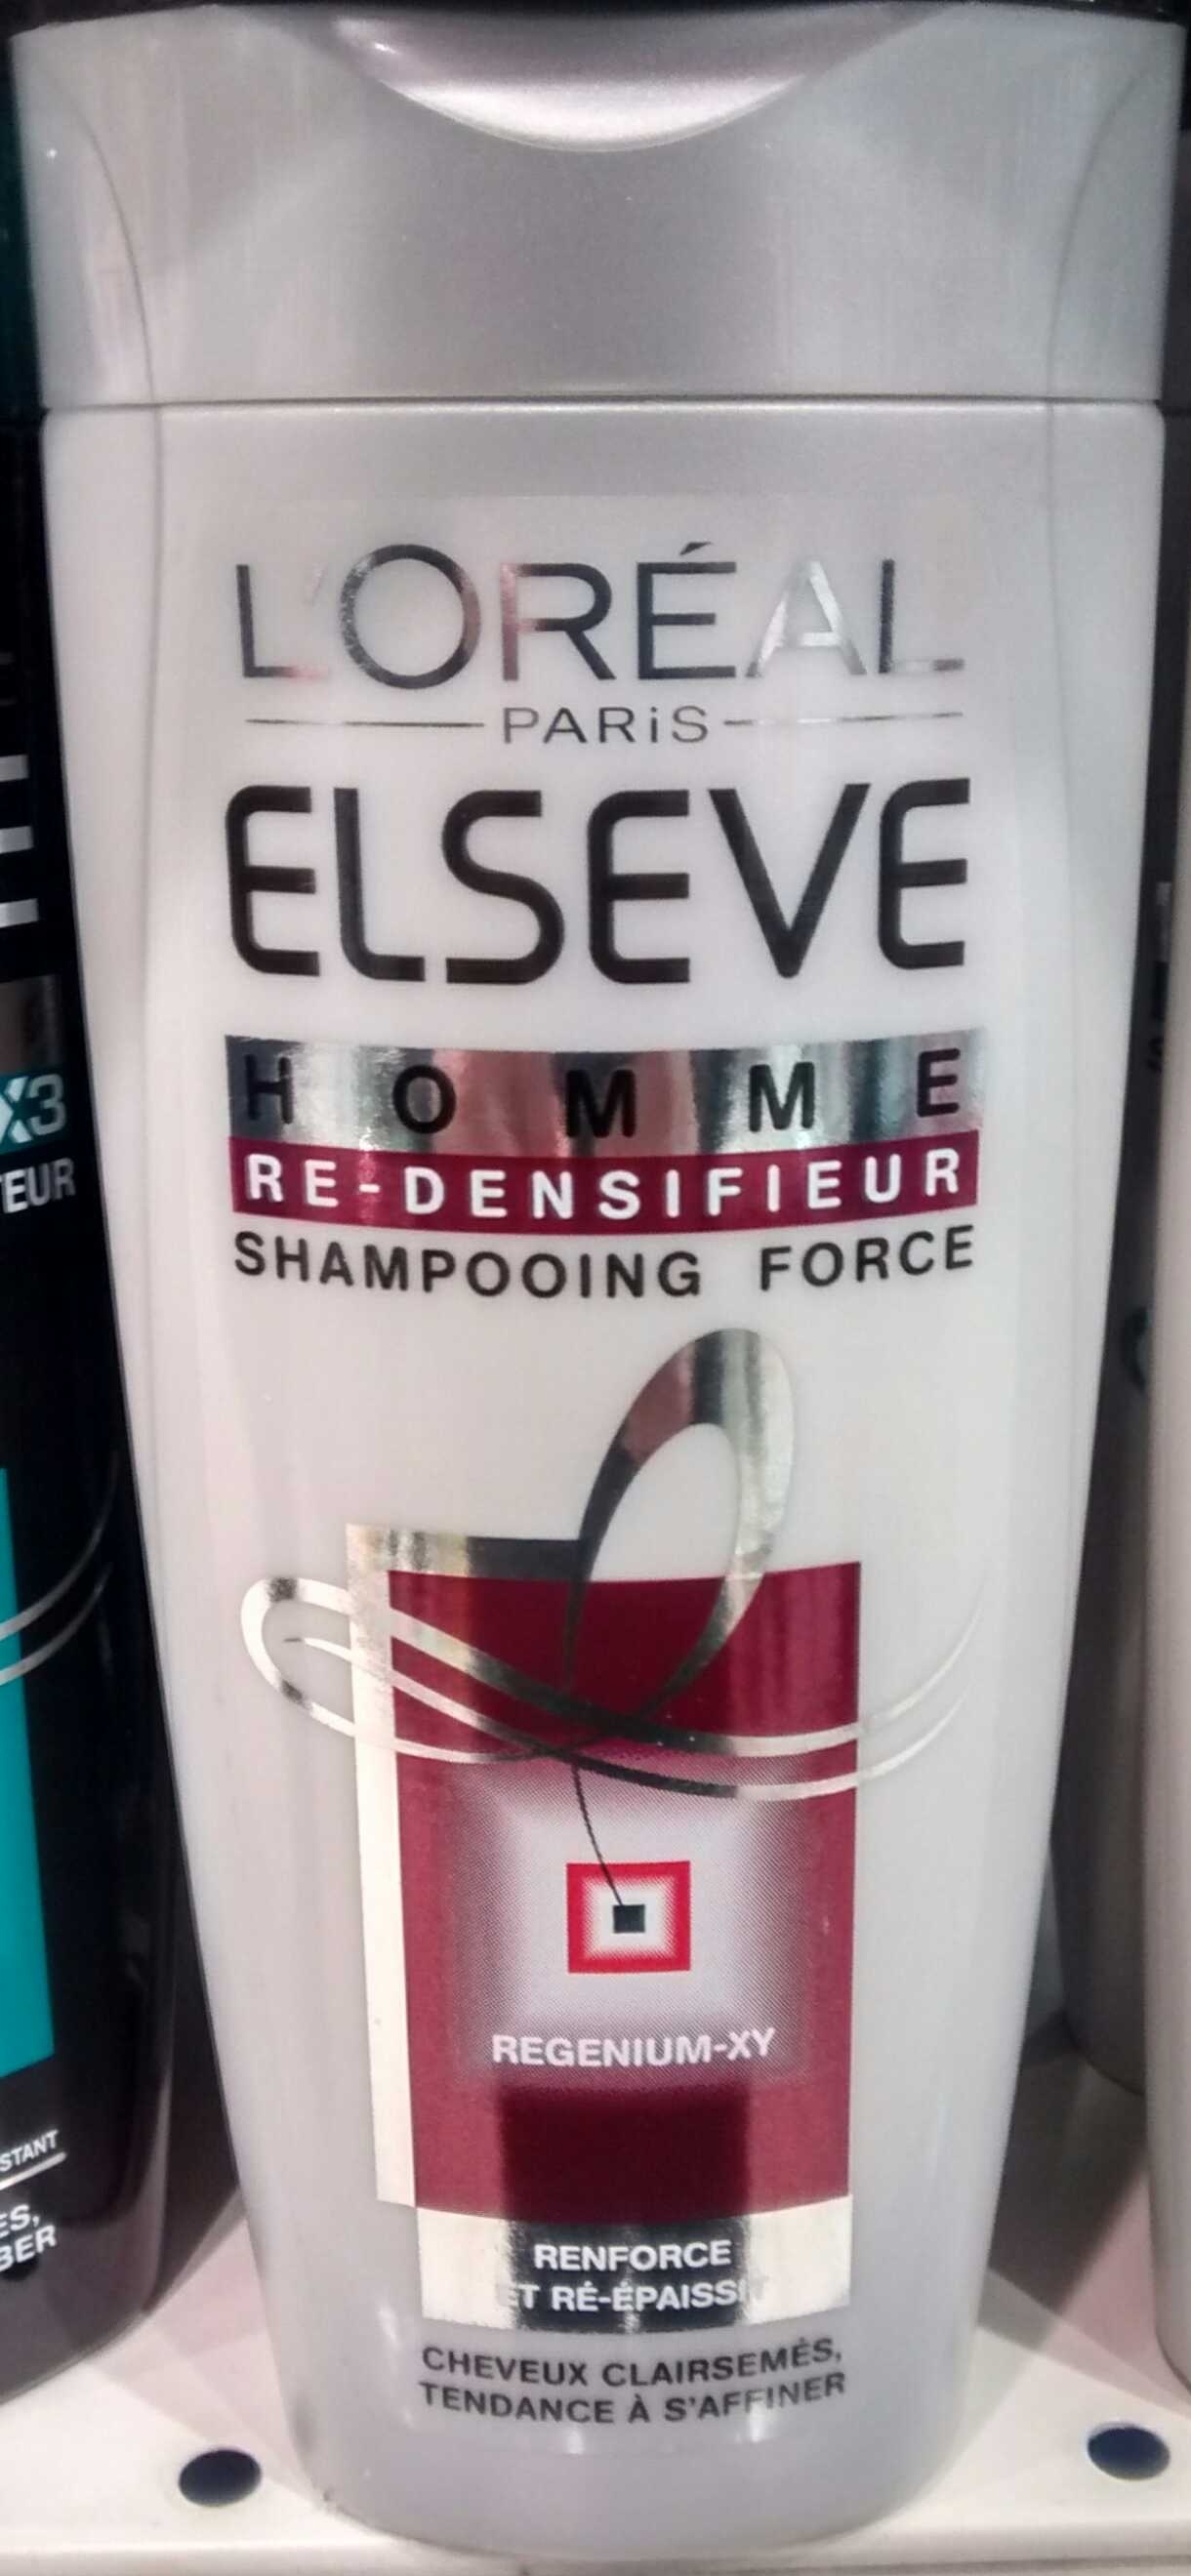 Re-densifieur shampooing force Homme - Product - fr